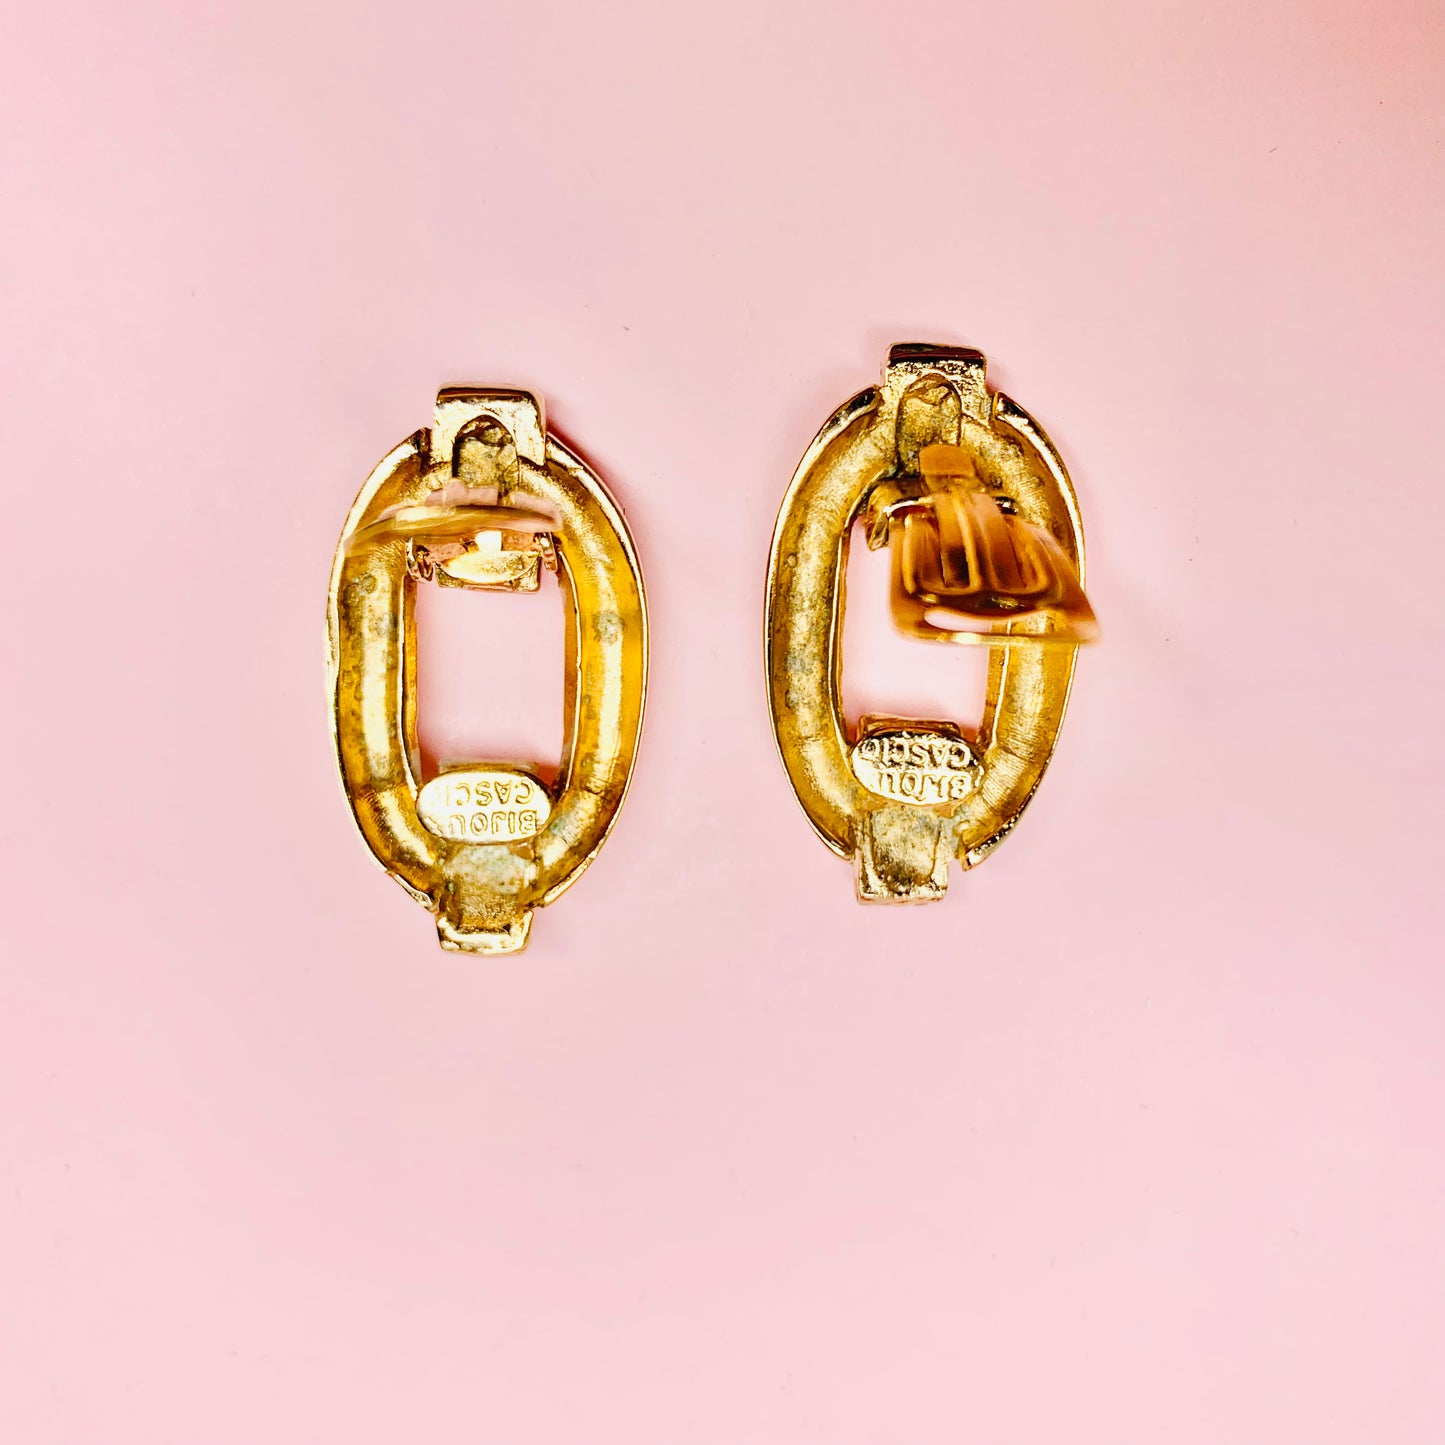 Extremely rare 1960s Bijoux Cascio gold plated clip on earrings with rhinestones